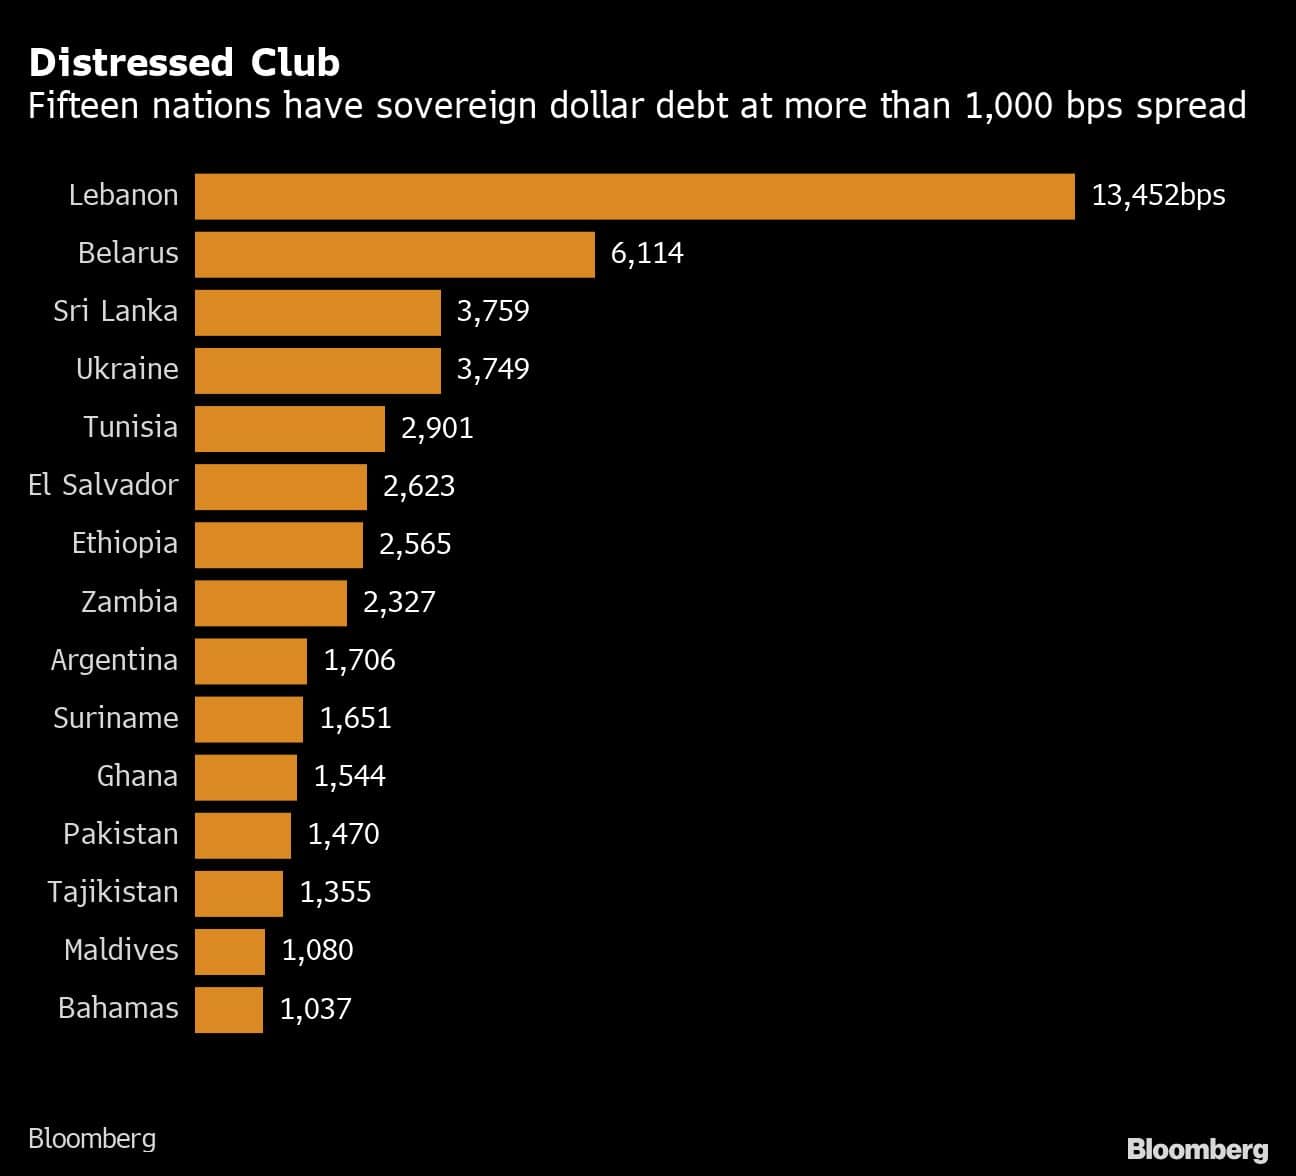 Distressed Club | Fifteen nations have sovereign dollar debt at more than 1,000 bps spread